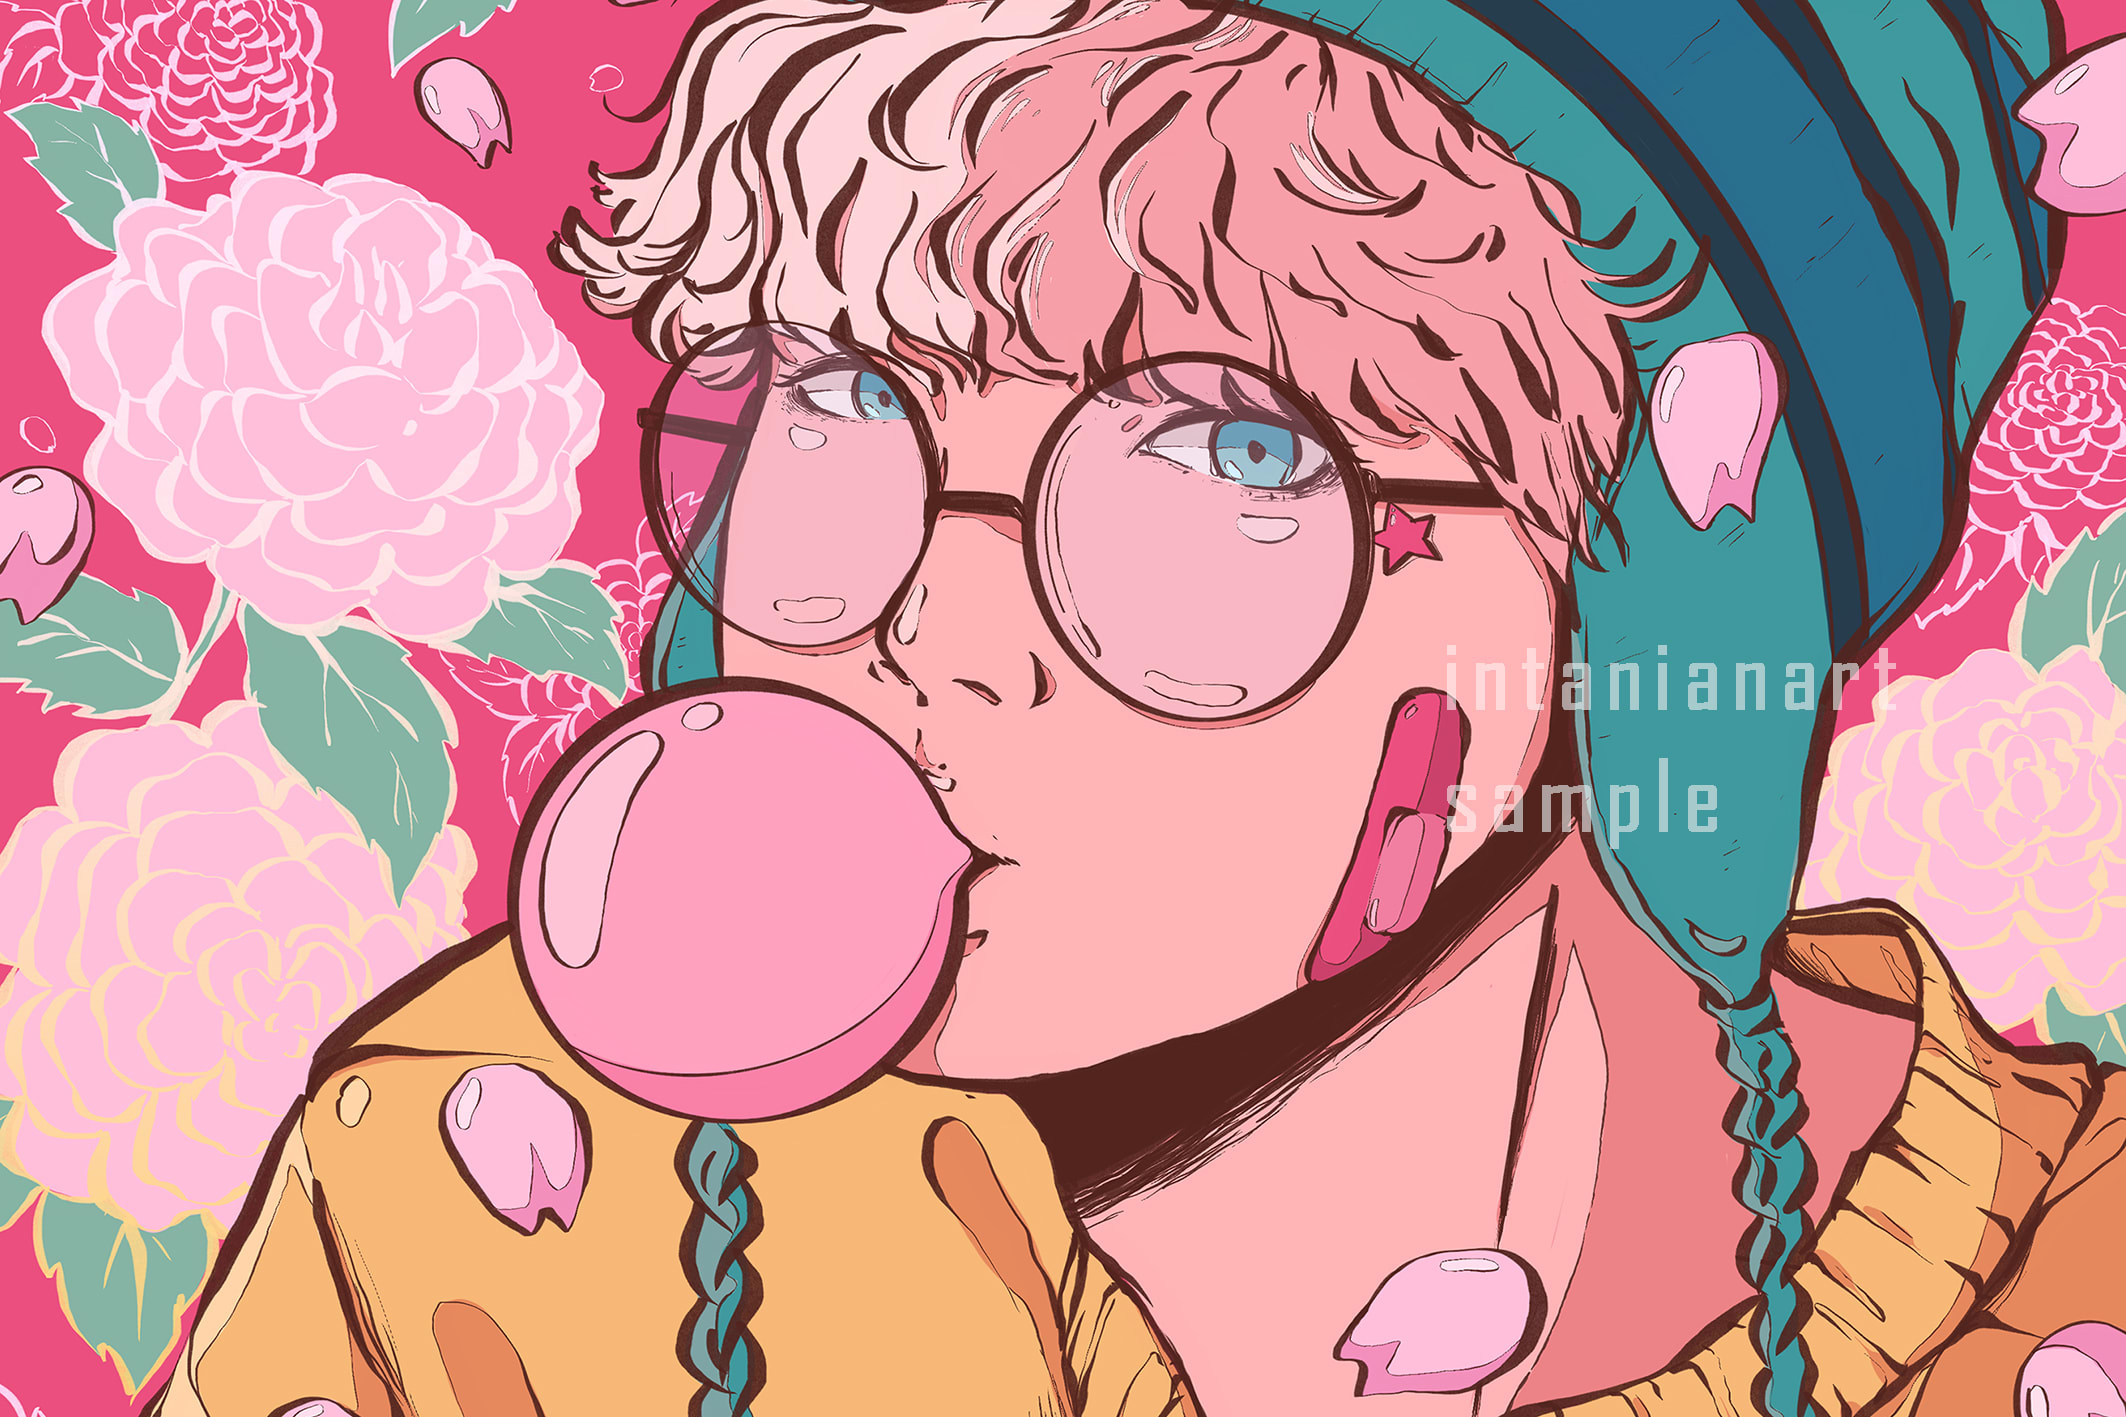 Custom Cute and Cool Anime Art Style Art Commission | Sketchmob